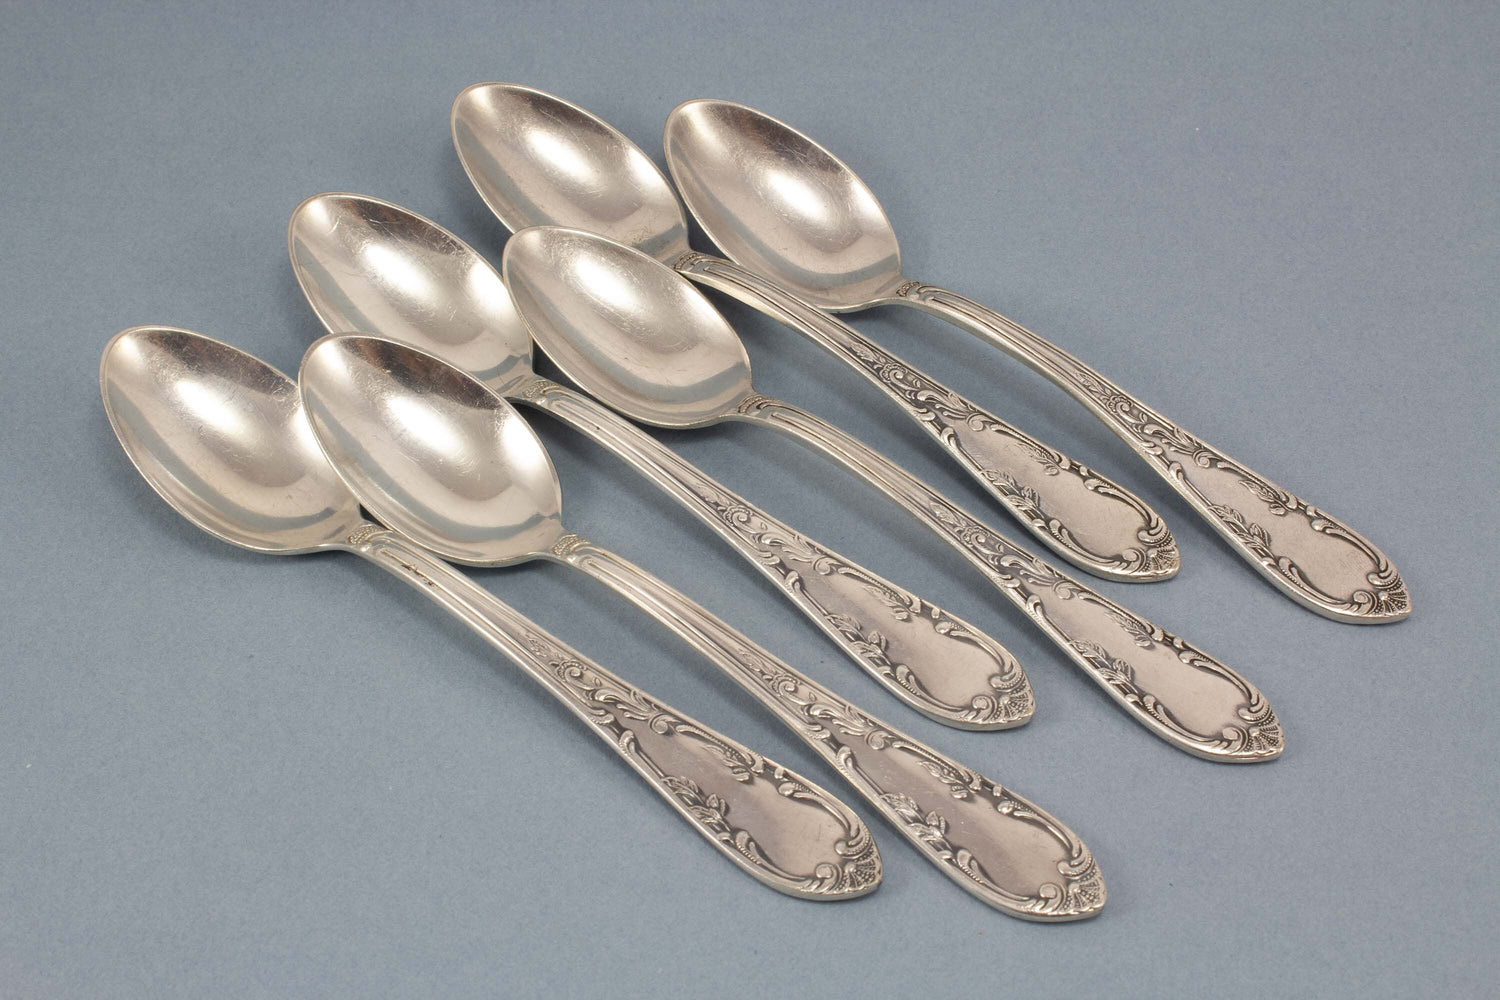 Vintage cutlery set for 6 people in rococo style